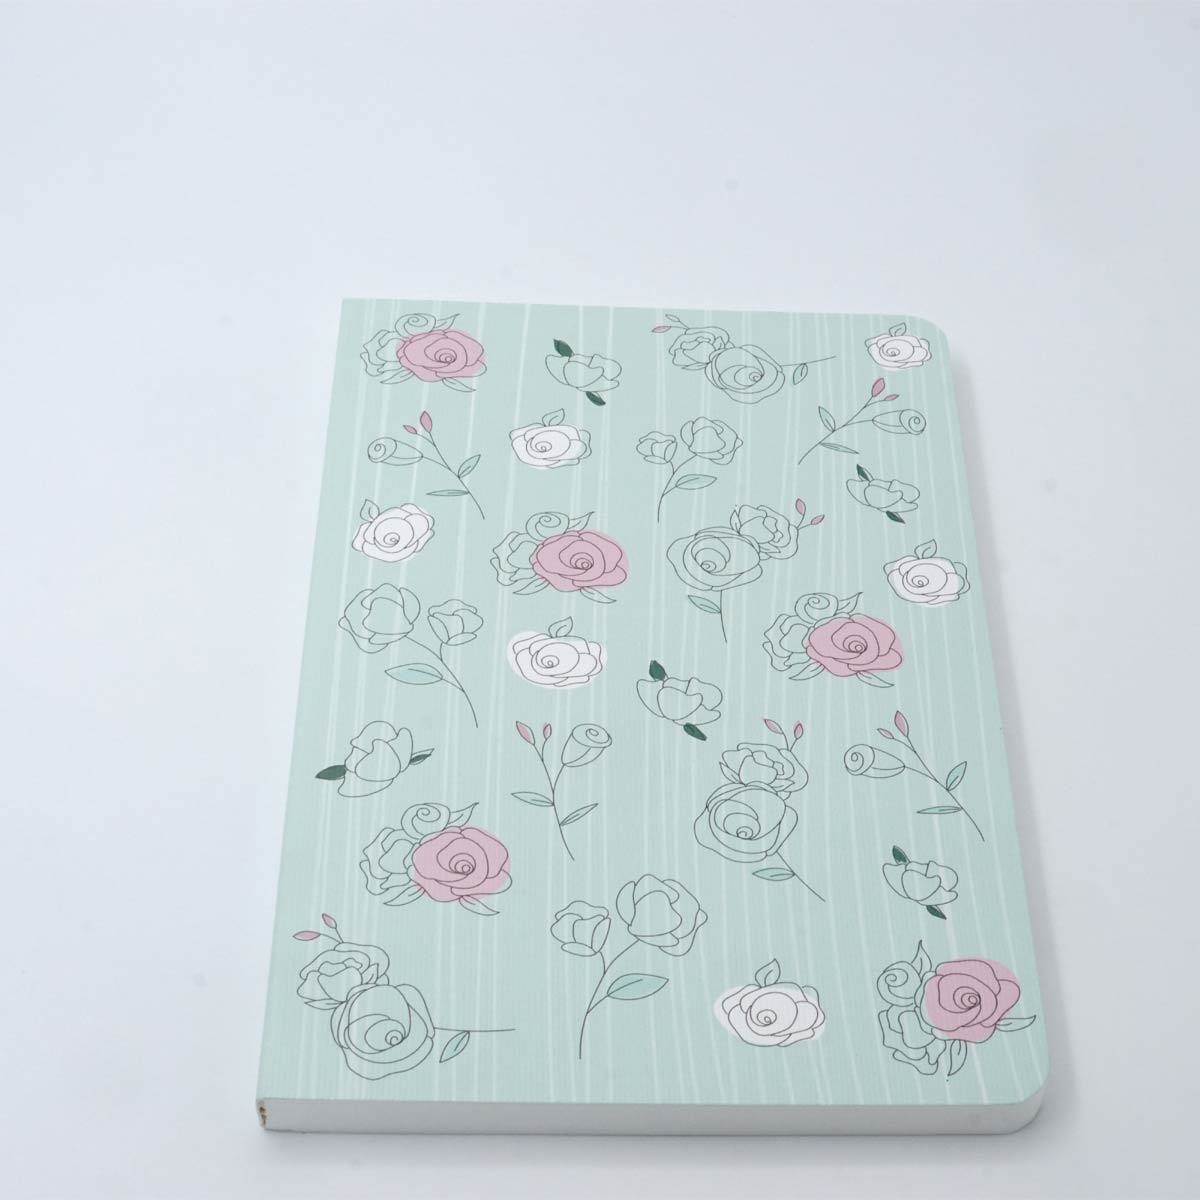 Factor A5 144 Pages Light Green With Rose Design Soft Bound 100 Gsm UnRuled Note Book SKU 50275